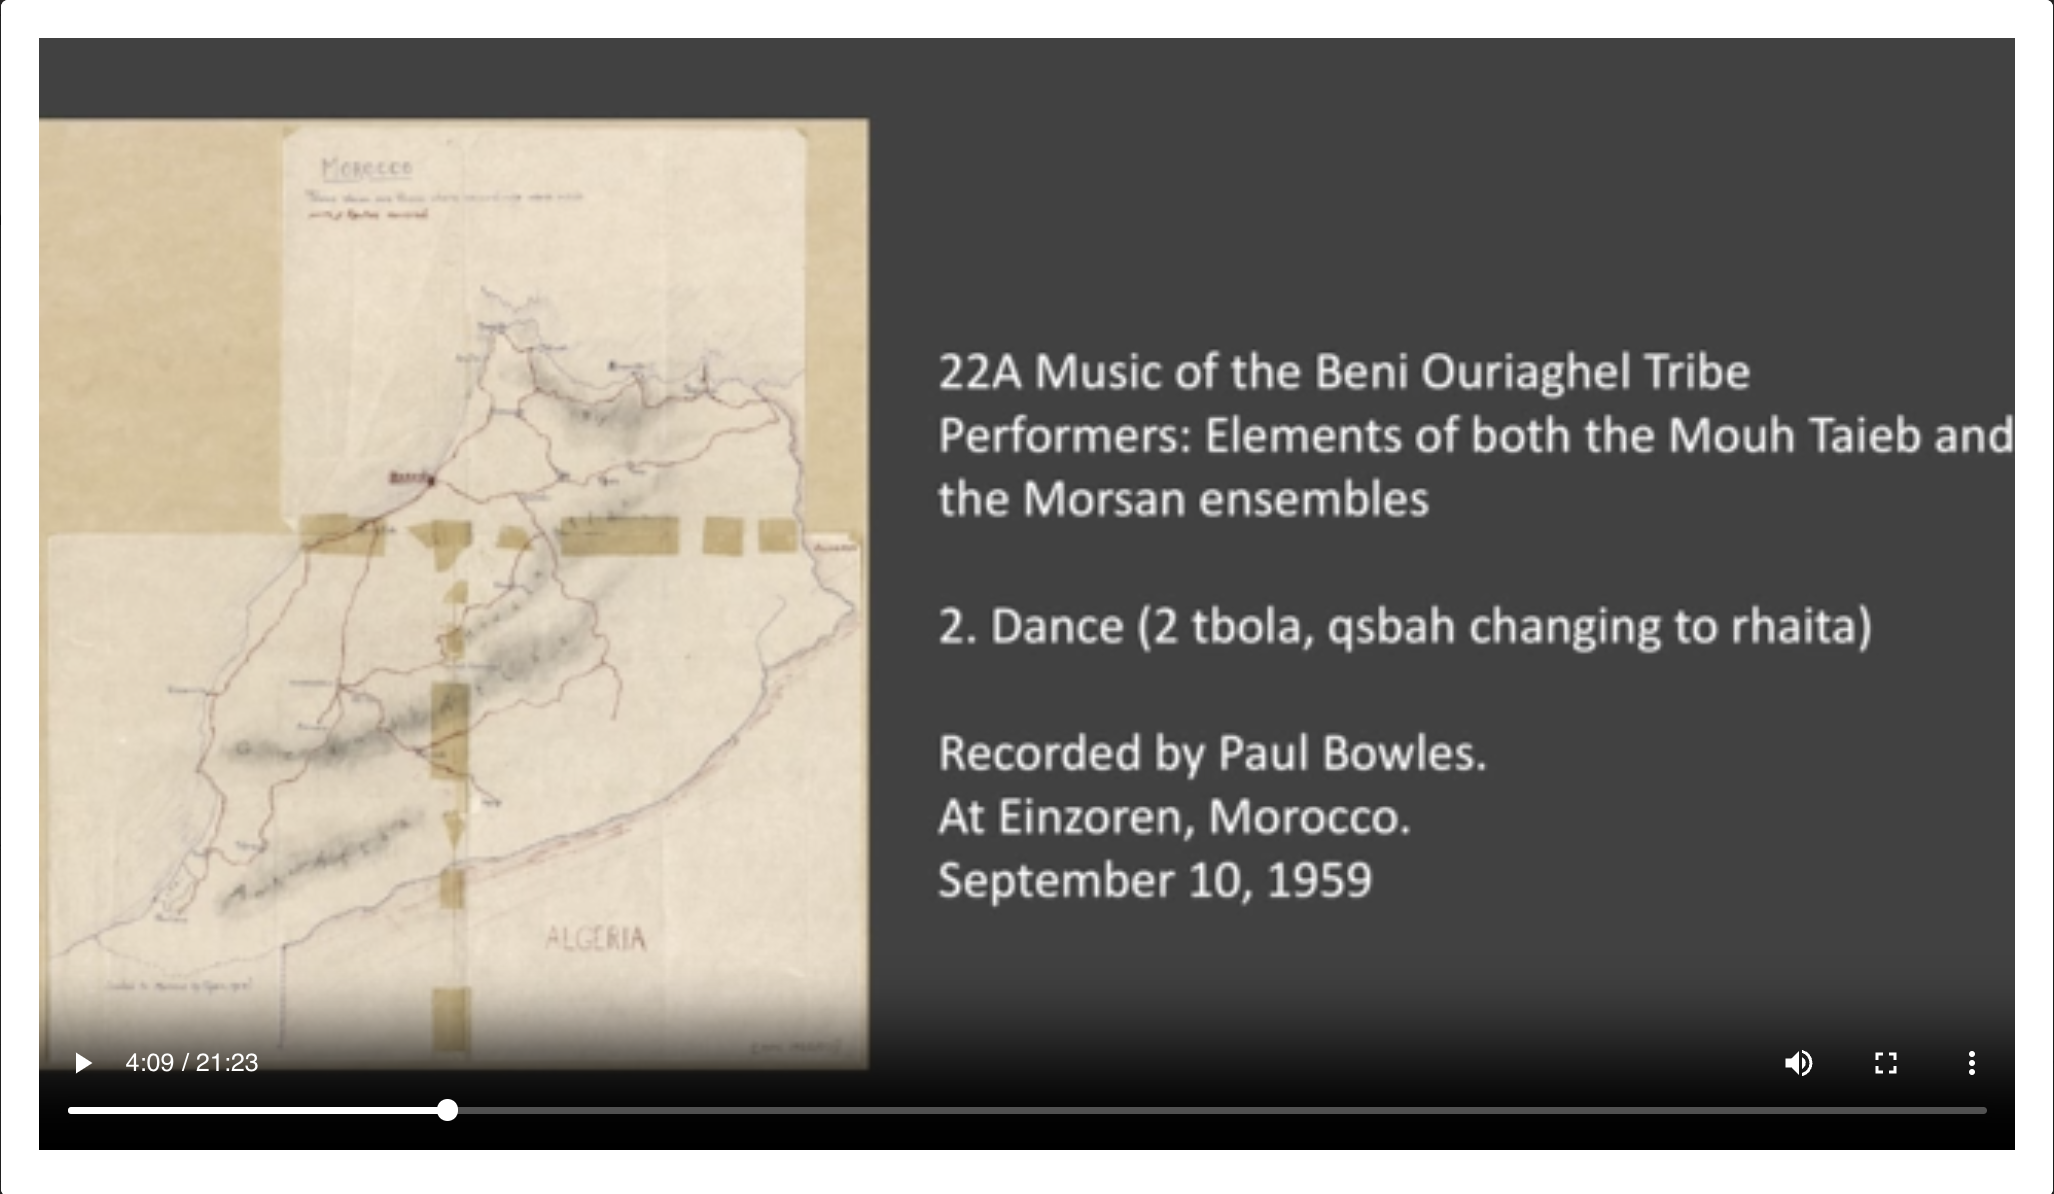 <p>22A-2 Dance (2 tbola, qsbah changing to rhaita) Music of the Beni Ouriaghel Tribe Performers: Elements of both the Mouh Taieb and the Morsan ensembles Recorded by Paul Bowles at Einzoren, Morocco. September 10, 1959</p>